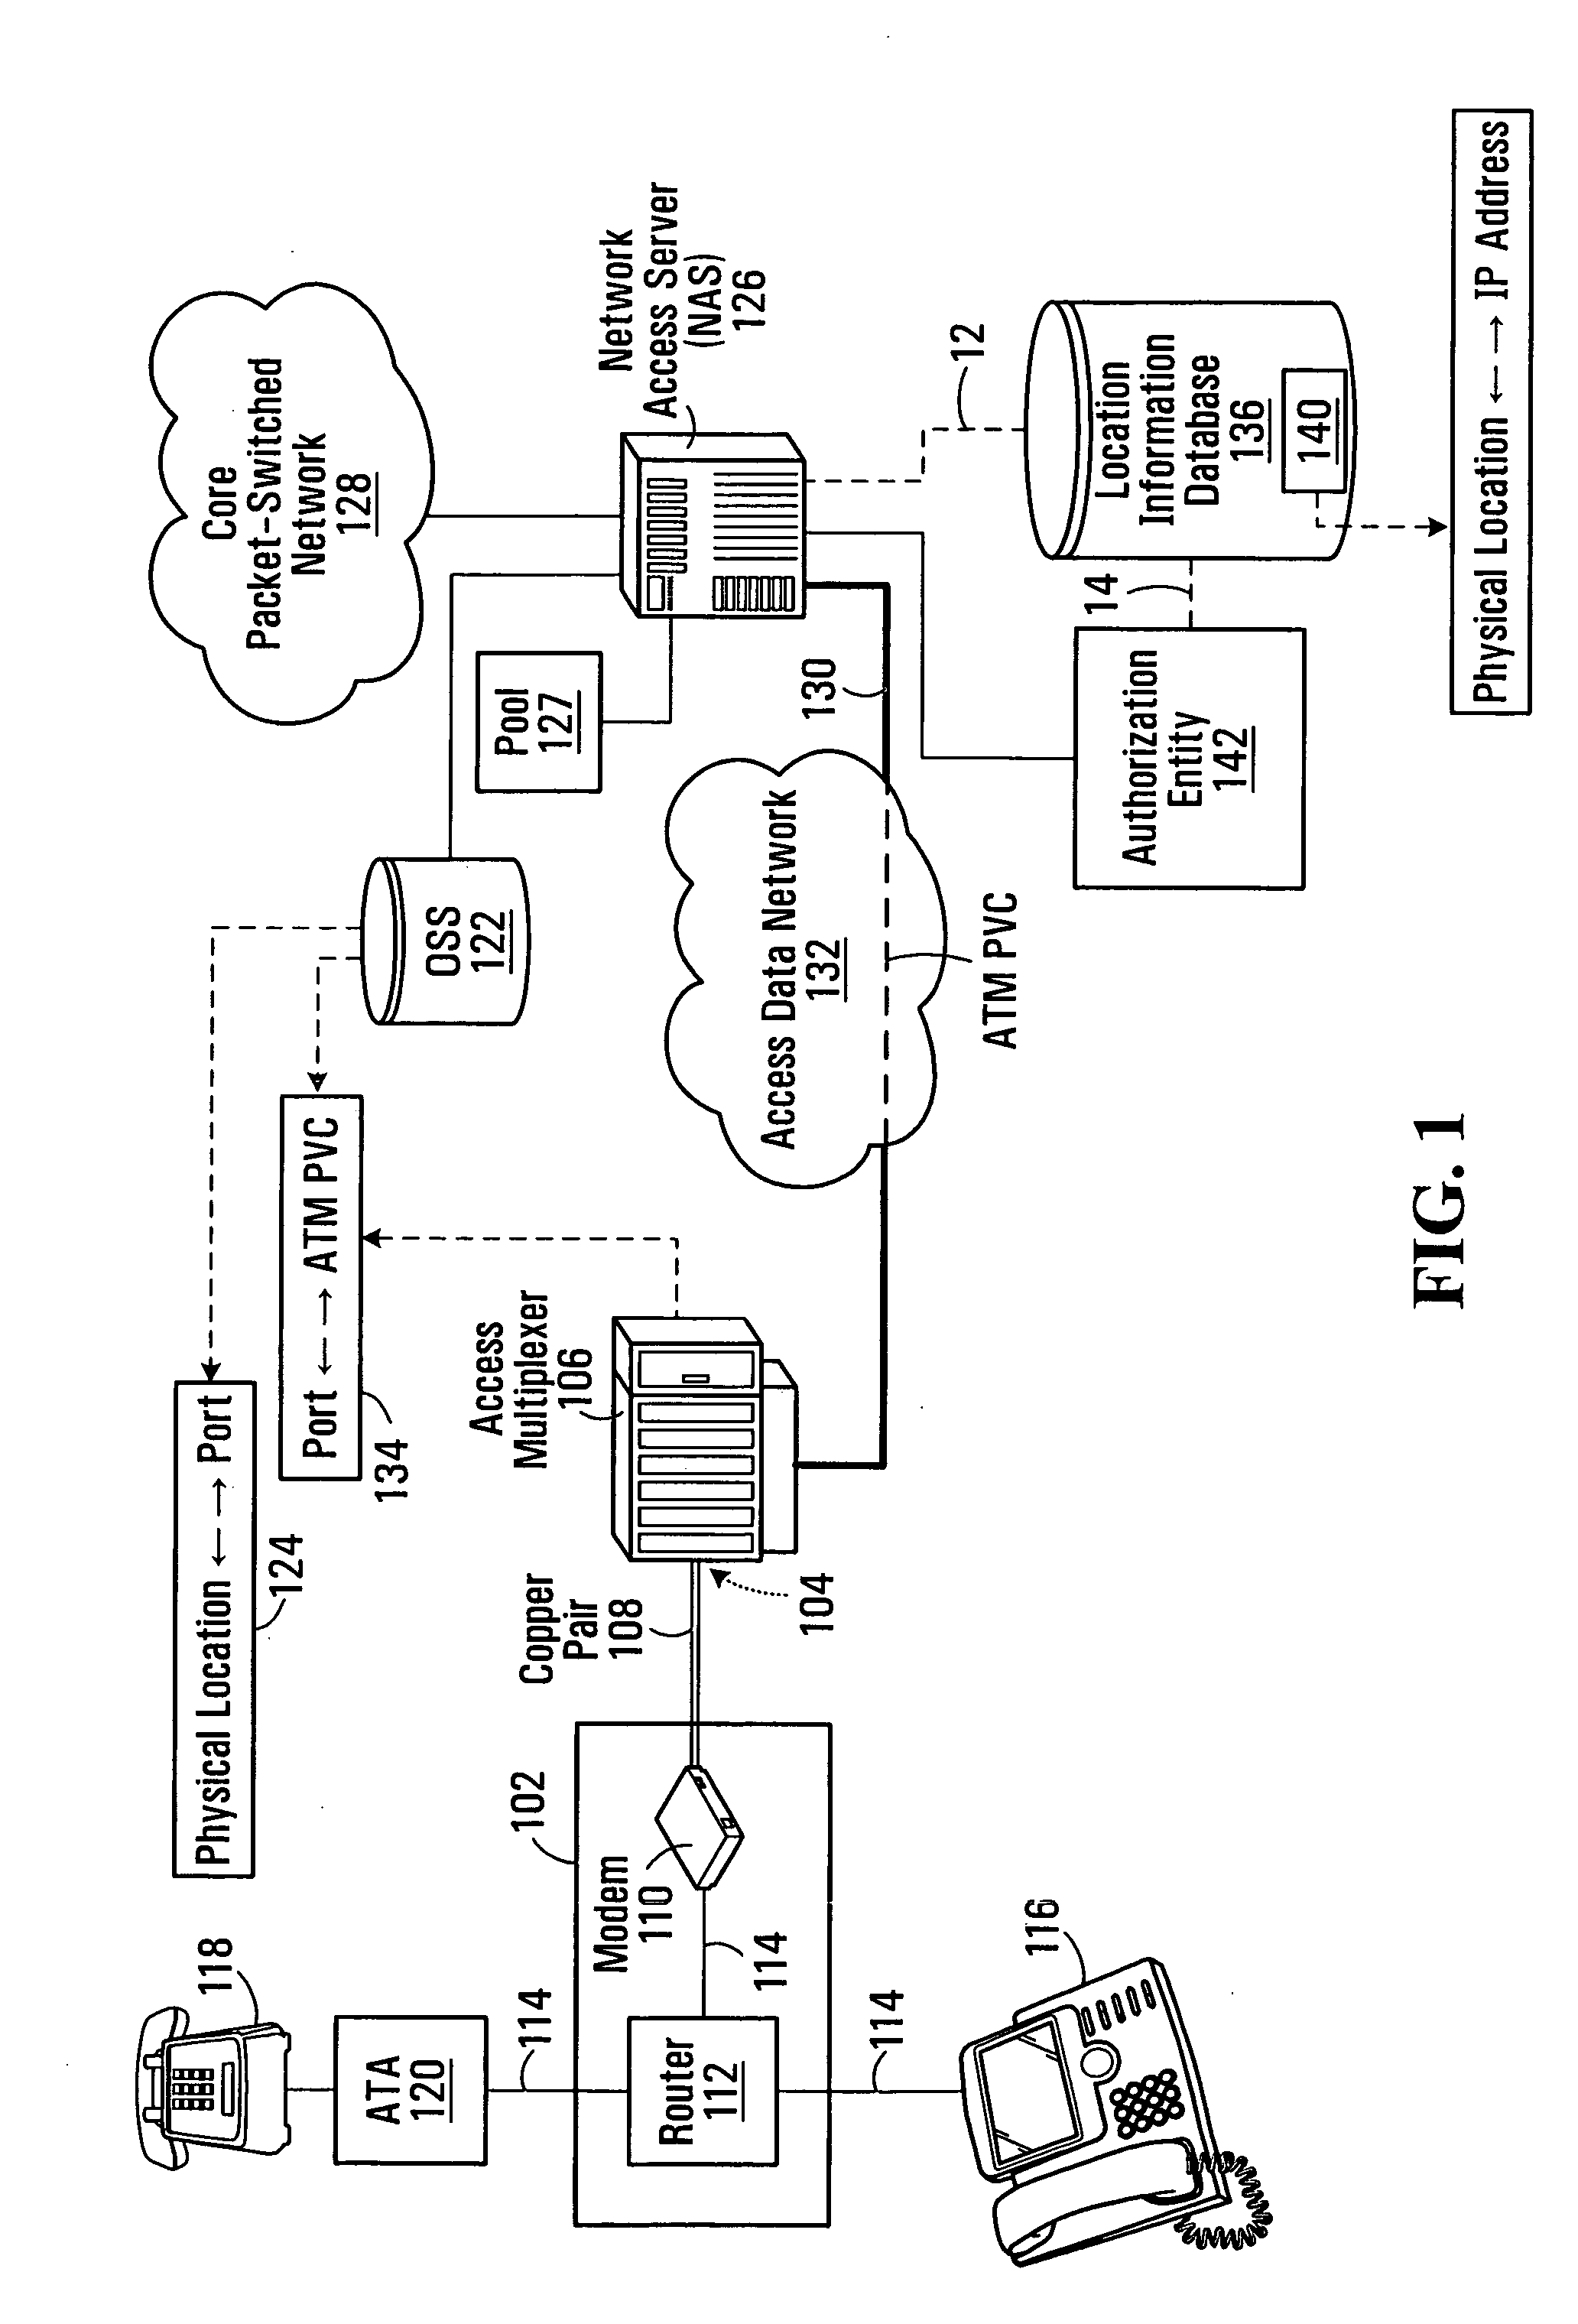 Method for populating a location information database used in the delivery of emergency and other location-based services in a VoIP environment